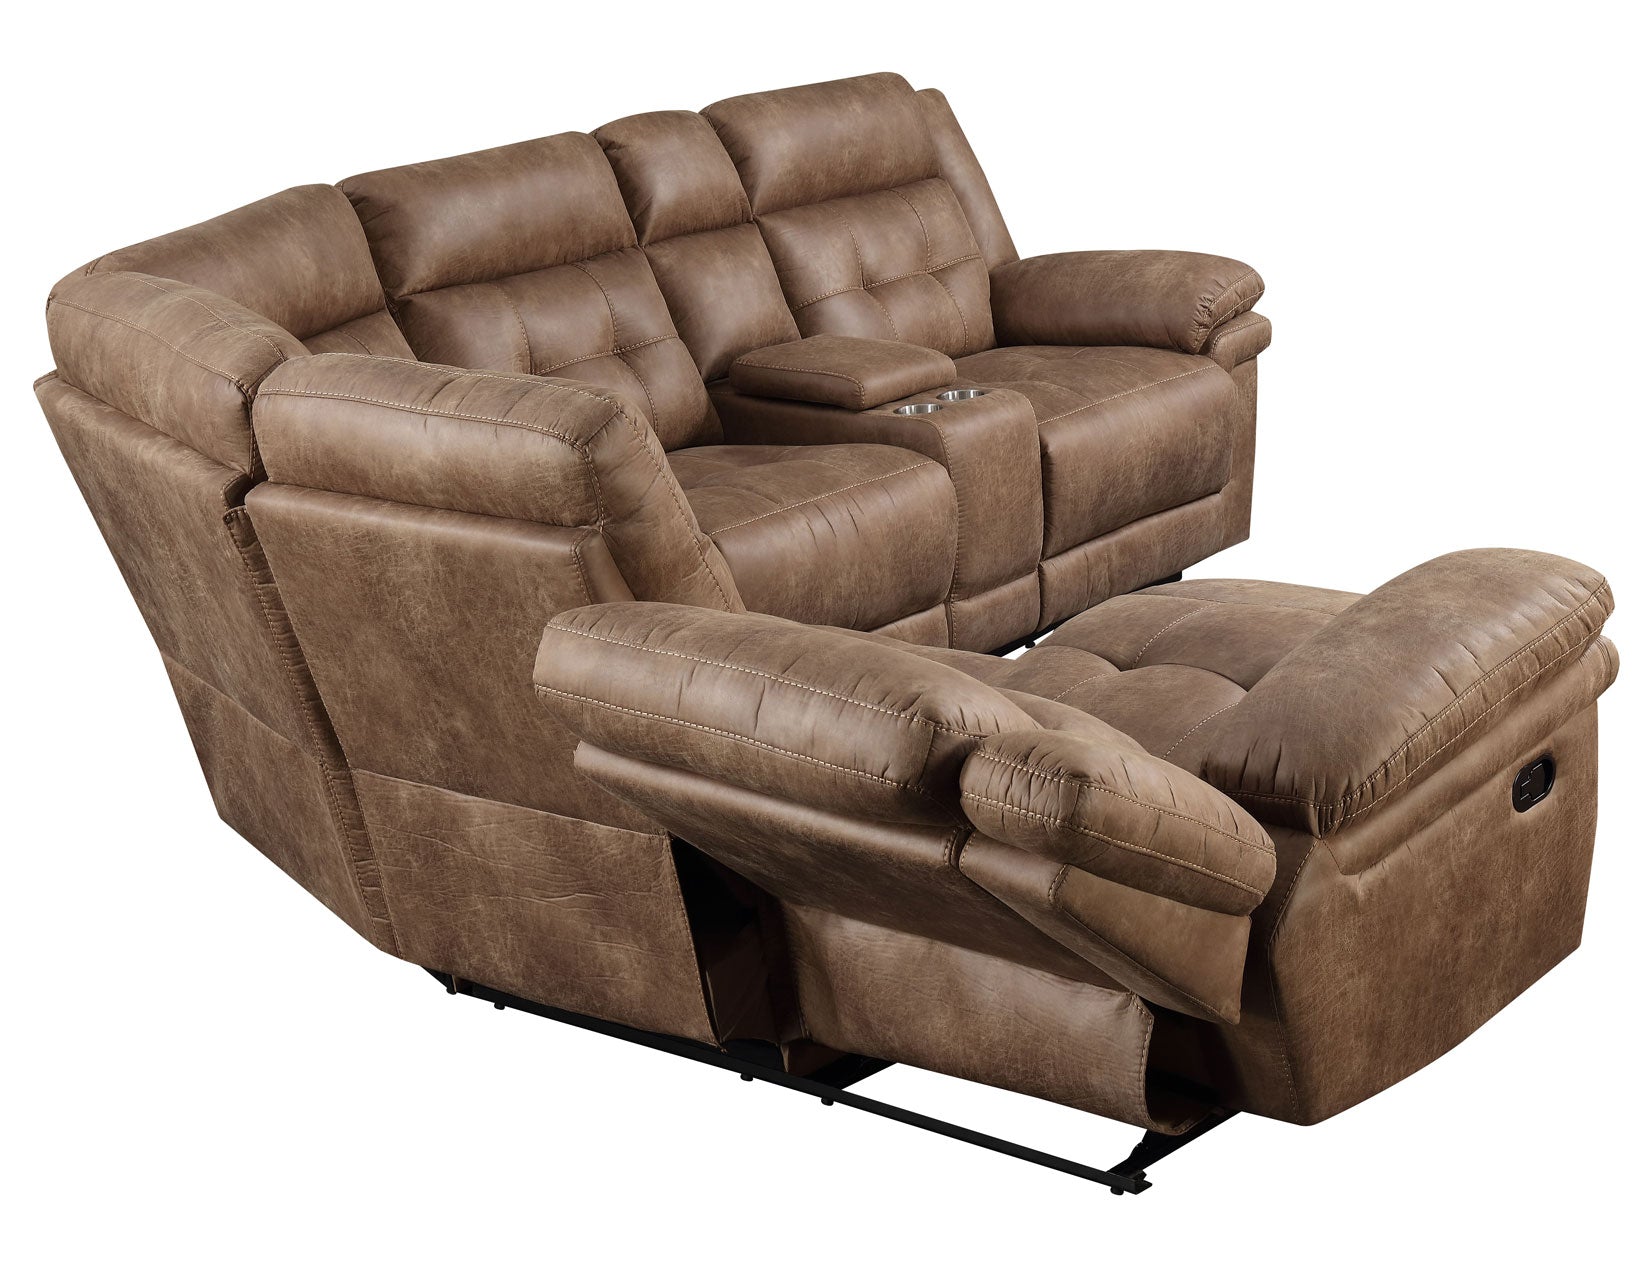 Anastasia 3-Piece Manual Reclining Sectional by Steve Silver